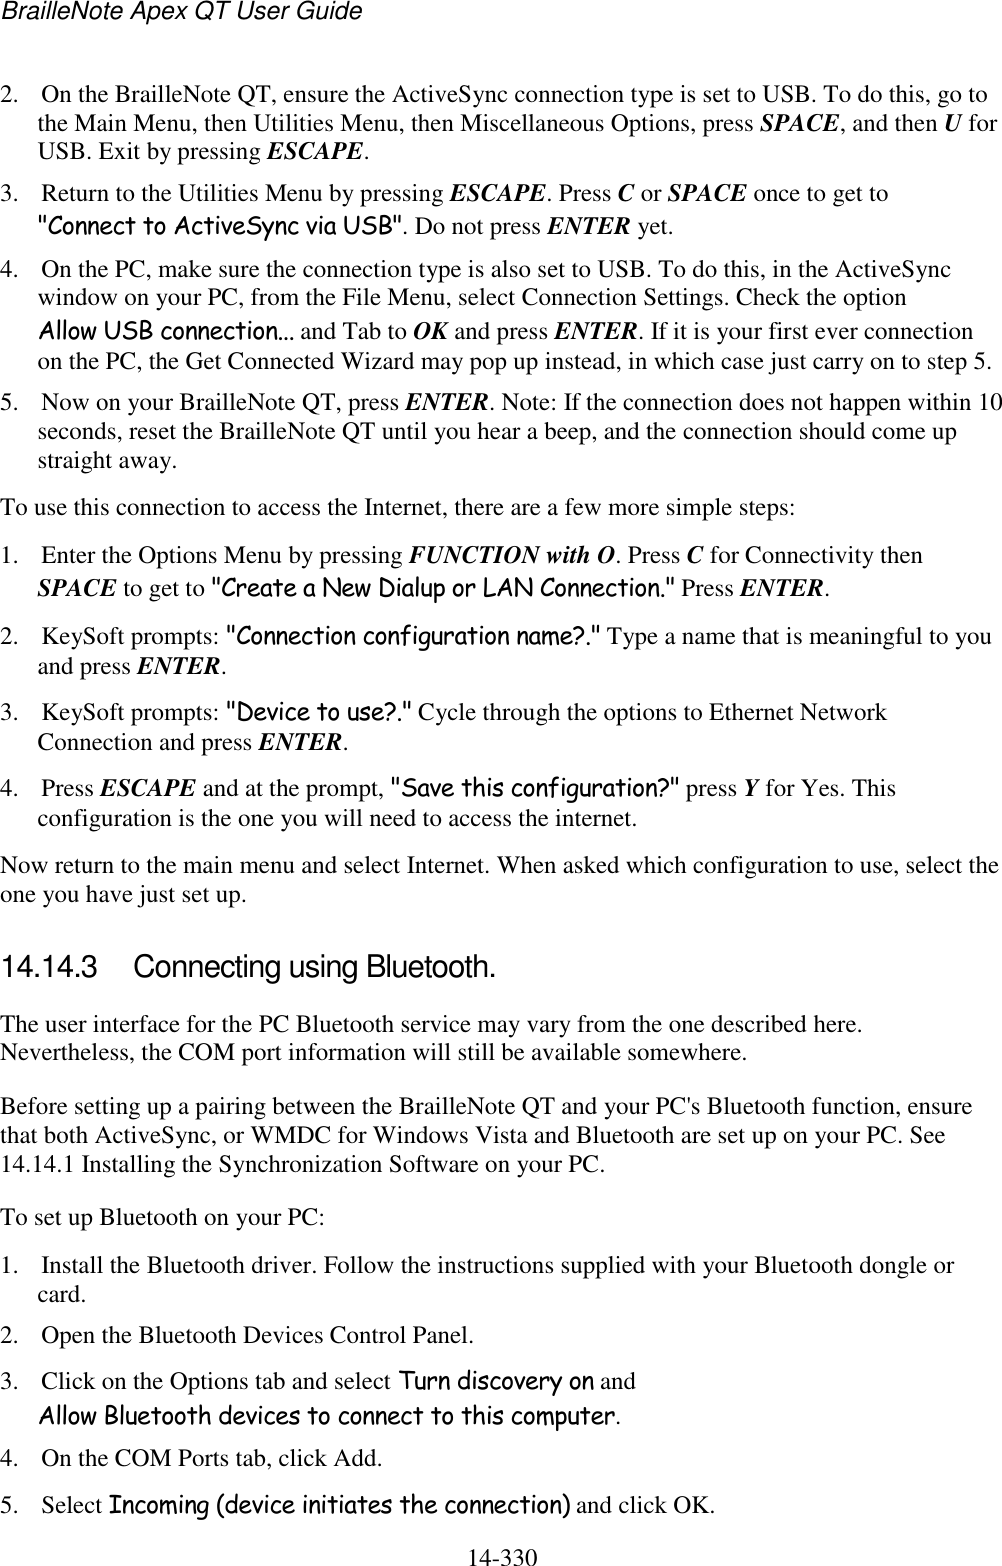 BrailleNote Apex QT User Guide  14-330   2. On the BrailleNote QT, ensure the ActiveSync connection type is set to USB. To do this, go to the Main Menu, then Utilities Menu, then Miscellaneous Options, press SPACE, and then U for USB. Exit by pressing ESCAPE.  3. Return to the Utilities Menu by pressing ESCAPE. Press C or SPACE once to get to &quot;Connect to ActiveSync via USB&quot;. Do not press ENTER yet. 4. On the PC, make sure the connection type is also set to USB. To do this, in the ActiveSync window on your PC, from the File Menu, select Connection Settings. Check the option Allow USB connection... and Tab to OK and press ENTER. If it is your first ever connection on the PC, the Get Connected Wizard may pop up instead, in which case just carry on to step 5. 5. Now on your BrailleNote QT, press ENTER. Note: If the connection does not happen within 10 seconds, reset the BrailleNote QT until you hear a beep, and the connection should come up straight away. To use this connection to access the Internet, there are a few more simple steps: 1. Enter the Options Menu by pressing FUNCTION with O. Press C for Connectivity then SPACE to get to &quot;Create a New Dialup or LAN Connection.&quot; Press ENTER. 2. KeySoft prompts: &quot;Connection configuration name?.&quot; Type a name that is meaningful to you and press ENTER. 3. KeySoft prompts: &quot;Device to use?.&quot; Cycle through the options to Ethernet Network Connection and press ENTER.  4. Press ESCAPE and at the prompt, &quot;Save this configuration?&quot; press Y for Yes. This configuration is the one you will need to access the internet. Now return to the main menu and select Internet. When asked which configuration to use, select the one you have just set up.  14.14.3  Connecting using Bluetooth. The user interface for the PC Bluetooth service may vary from the one described here. Nevertheless, the COM port information will still be available somewhere.  Before setting up a pairing between the BrailleNote QT and your PC&apos;s Bluetooth function, ensure that both ActiveSync, or WMDC for Windows Vista and Bluetooth are set up on your PC. See 14.14.1 Installing the Synchronization Software on your PC. To set up Bluetooth on your PC:  1. Install the Bluetooth driver. Follow the instructions supplied with your Bluetooth dongle or card. 2. Open the Bluetooth Devices Control Panel.  3. Click on the Options tab and select Turn discovery on and Allow Bluetooth devices to connect to this computer.  4. On the COM Ports tab, click Add.  5. Select Incoming (device initiates the connection) and click OK.  